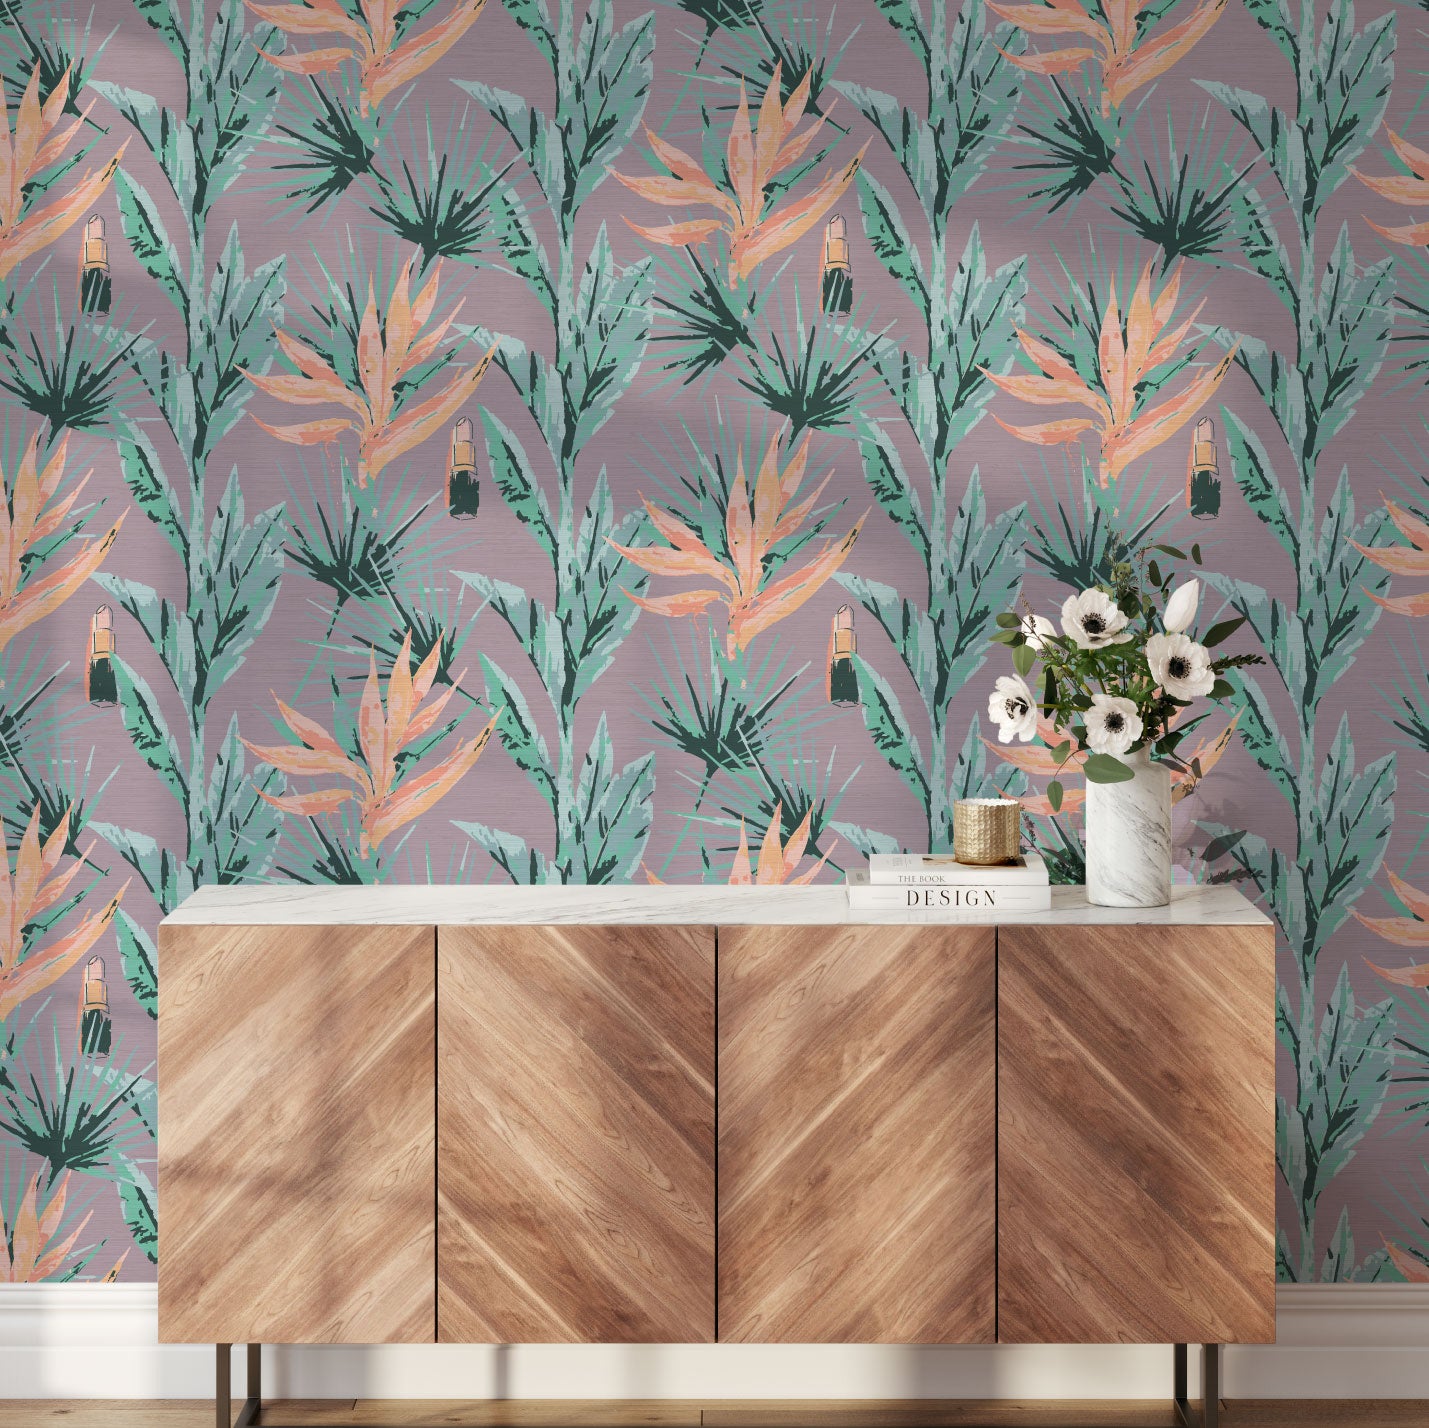 Load image into Gallery viewer, light purple based allover floral print with light pink and orange birds of paradise floral paired with shades of green palm leaves with added light pink lipstick tubes scattered throughout the print Grasscloth Natural Textured Eco-Friendly Non-toxic High-quality  Sustainable practices Sustainability Interior Design Wall covering bold vertical stripe botanical flowers garden tropical jungle beauty salon medspa makeup office entrance waiting room
